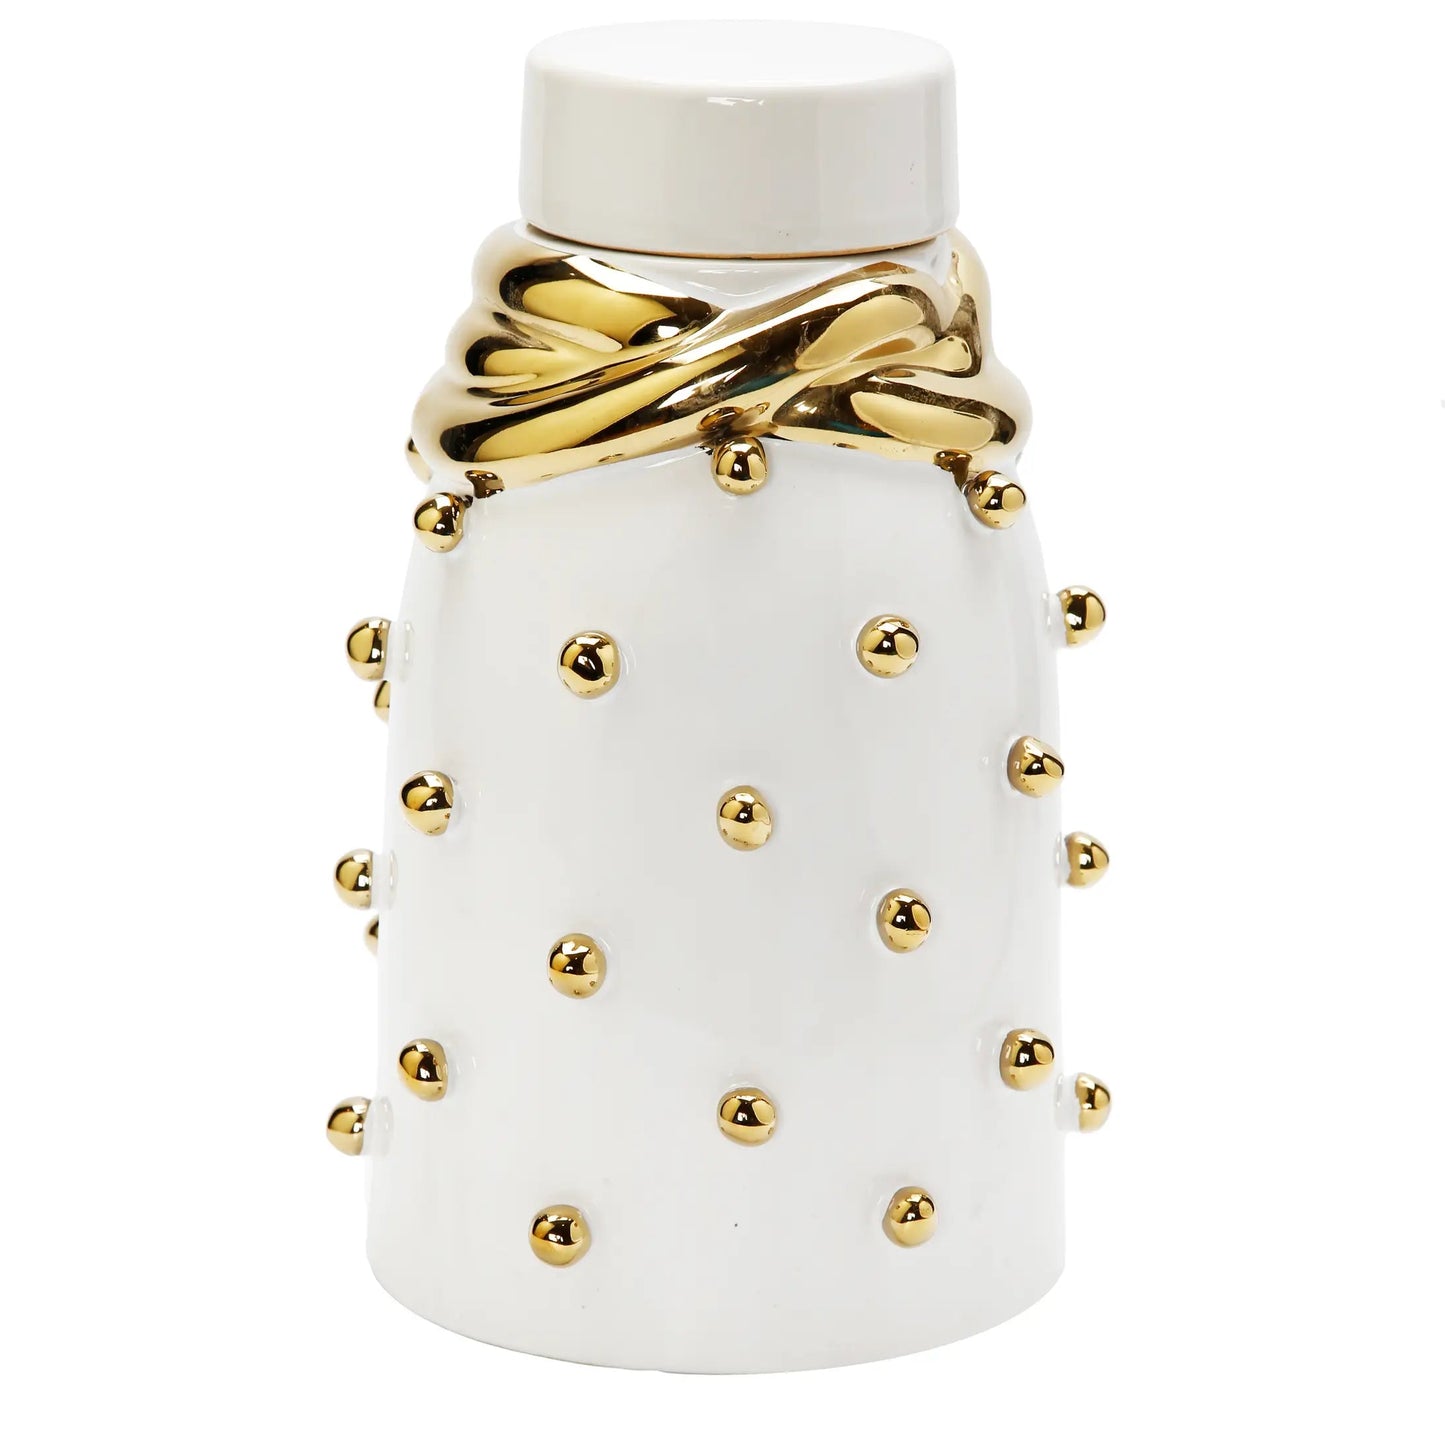 White Ceramic Jar with Gold Elegant Detail and Studded Decorative Jars High Class Touch - Home Decor Medium 